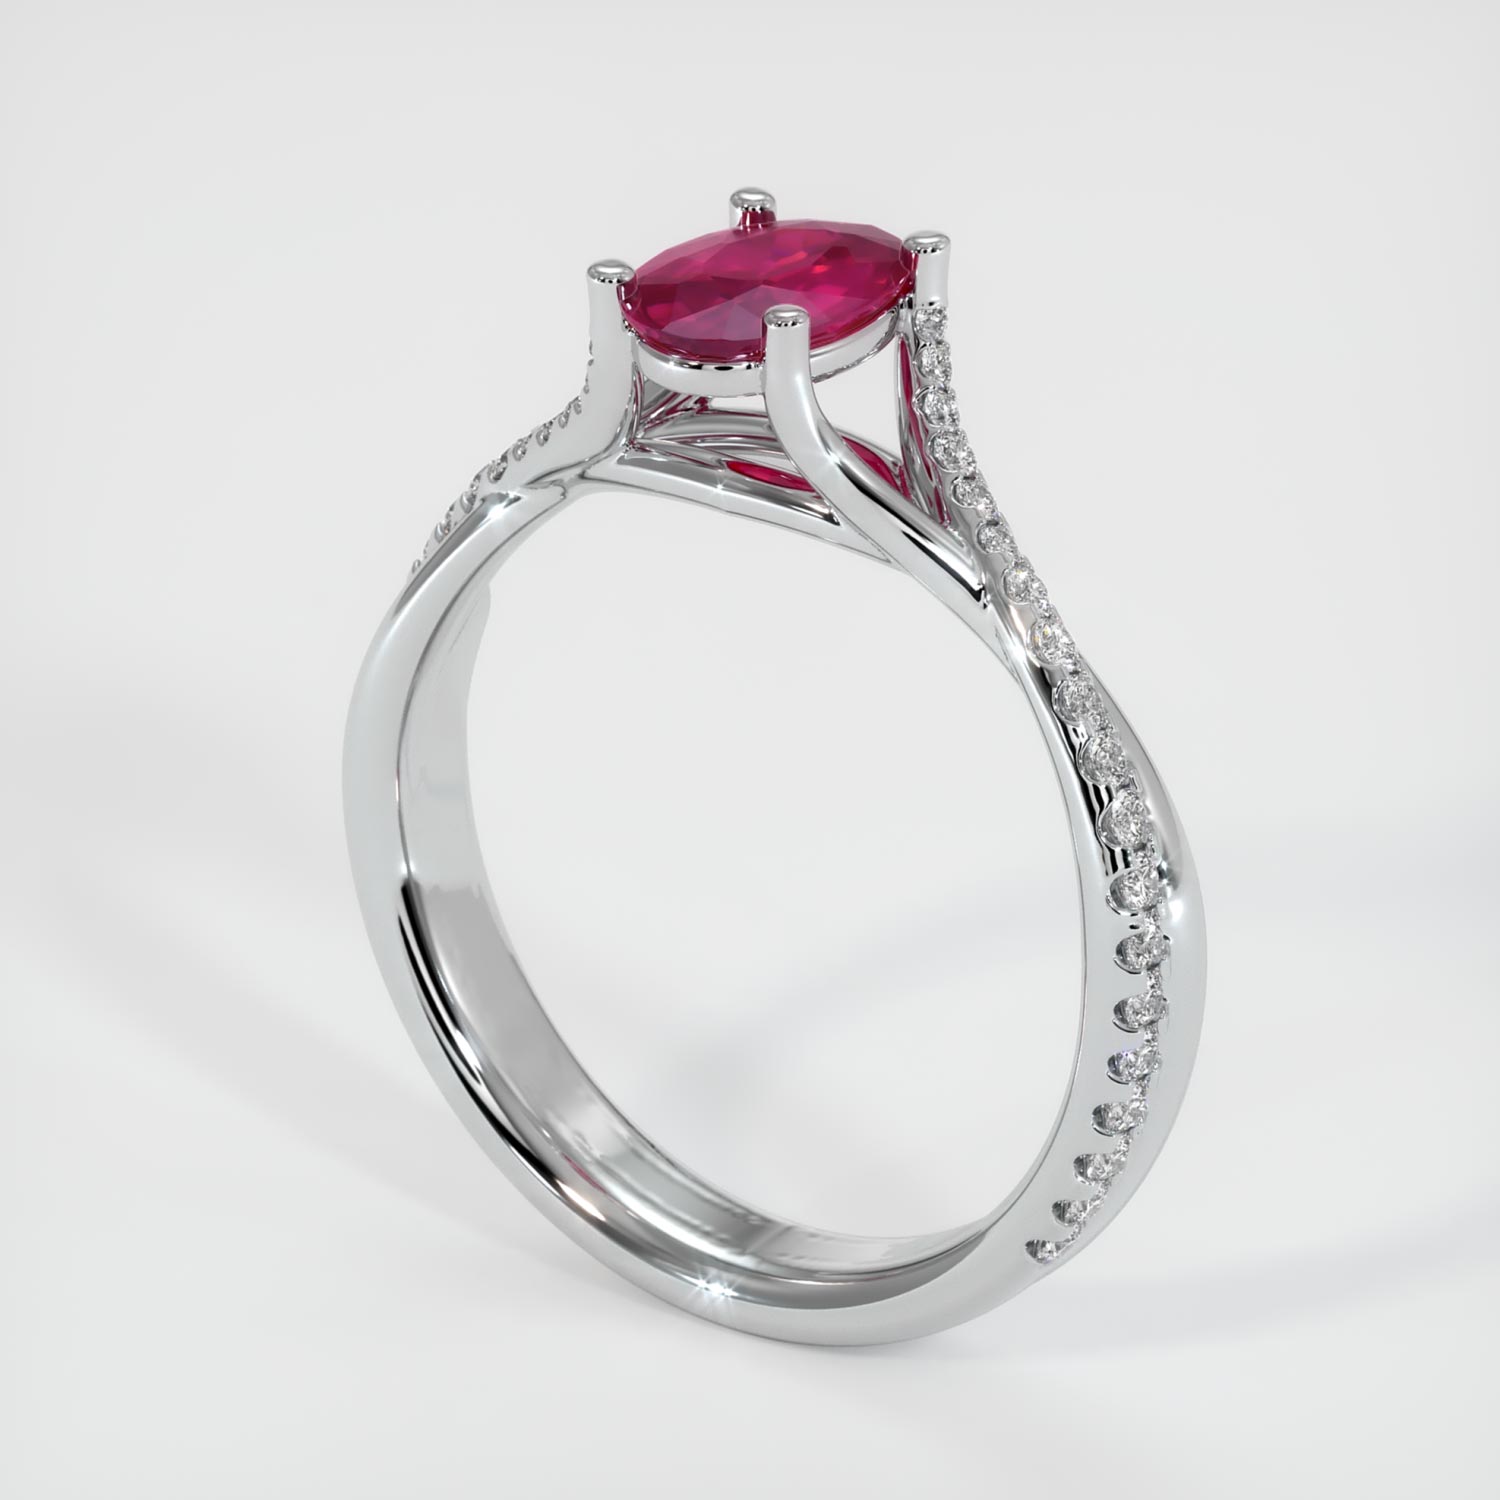 Pave Ruby Ring 0.70 Ct., 14K White Gold